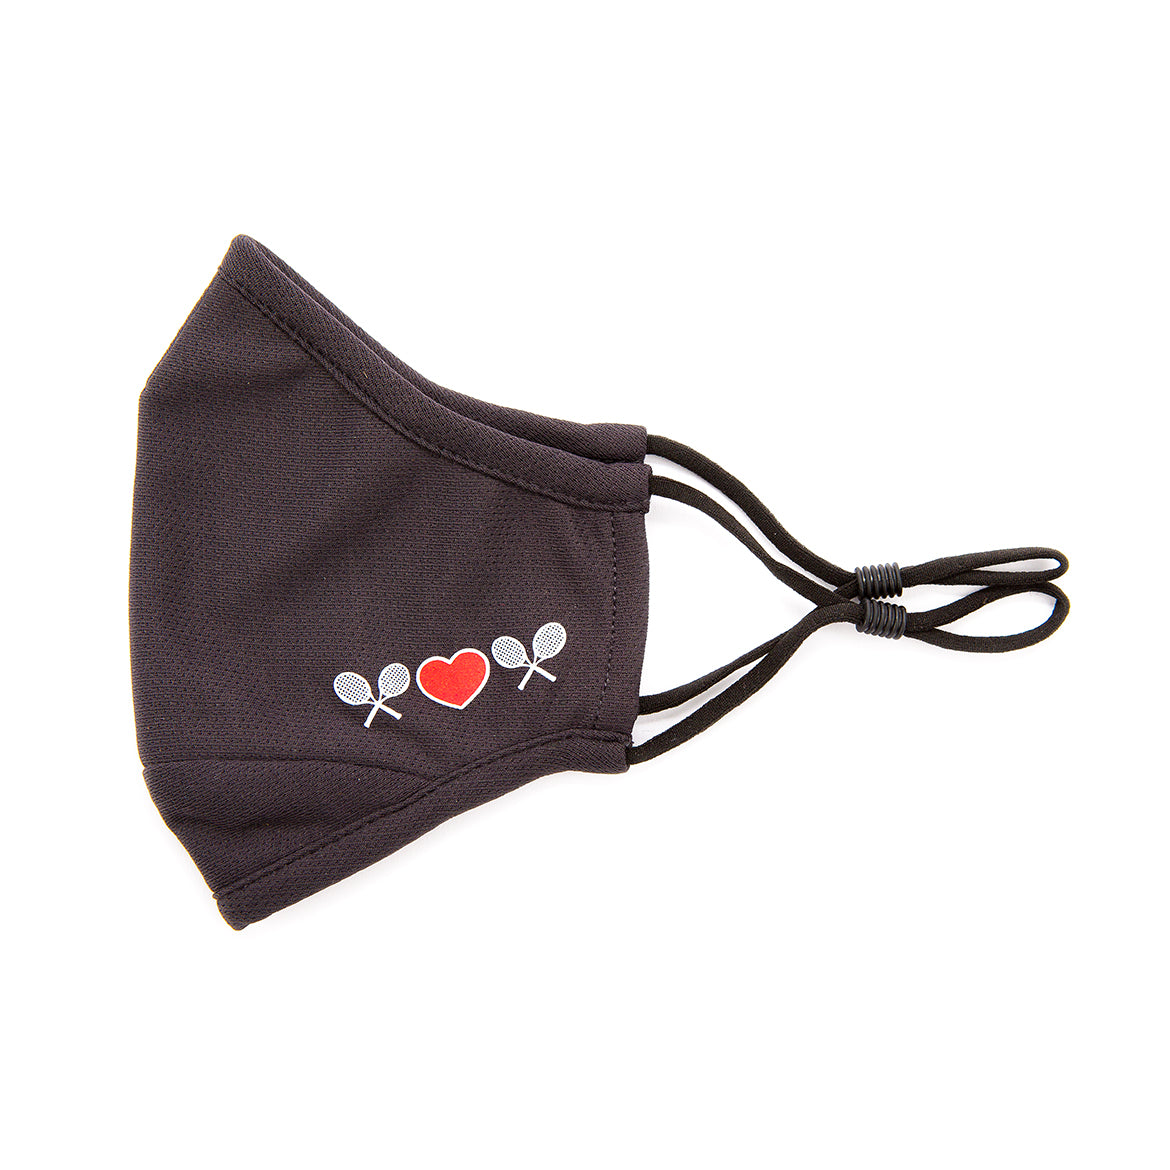 charcoal grey face mask with white tennis racquets and red heart printed on one side